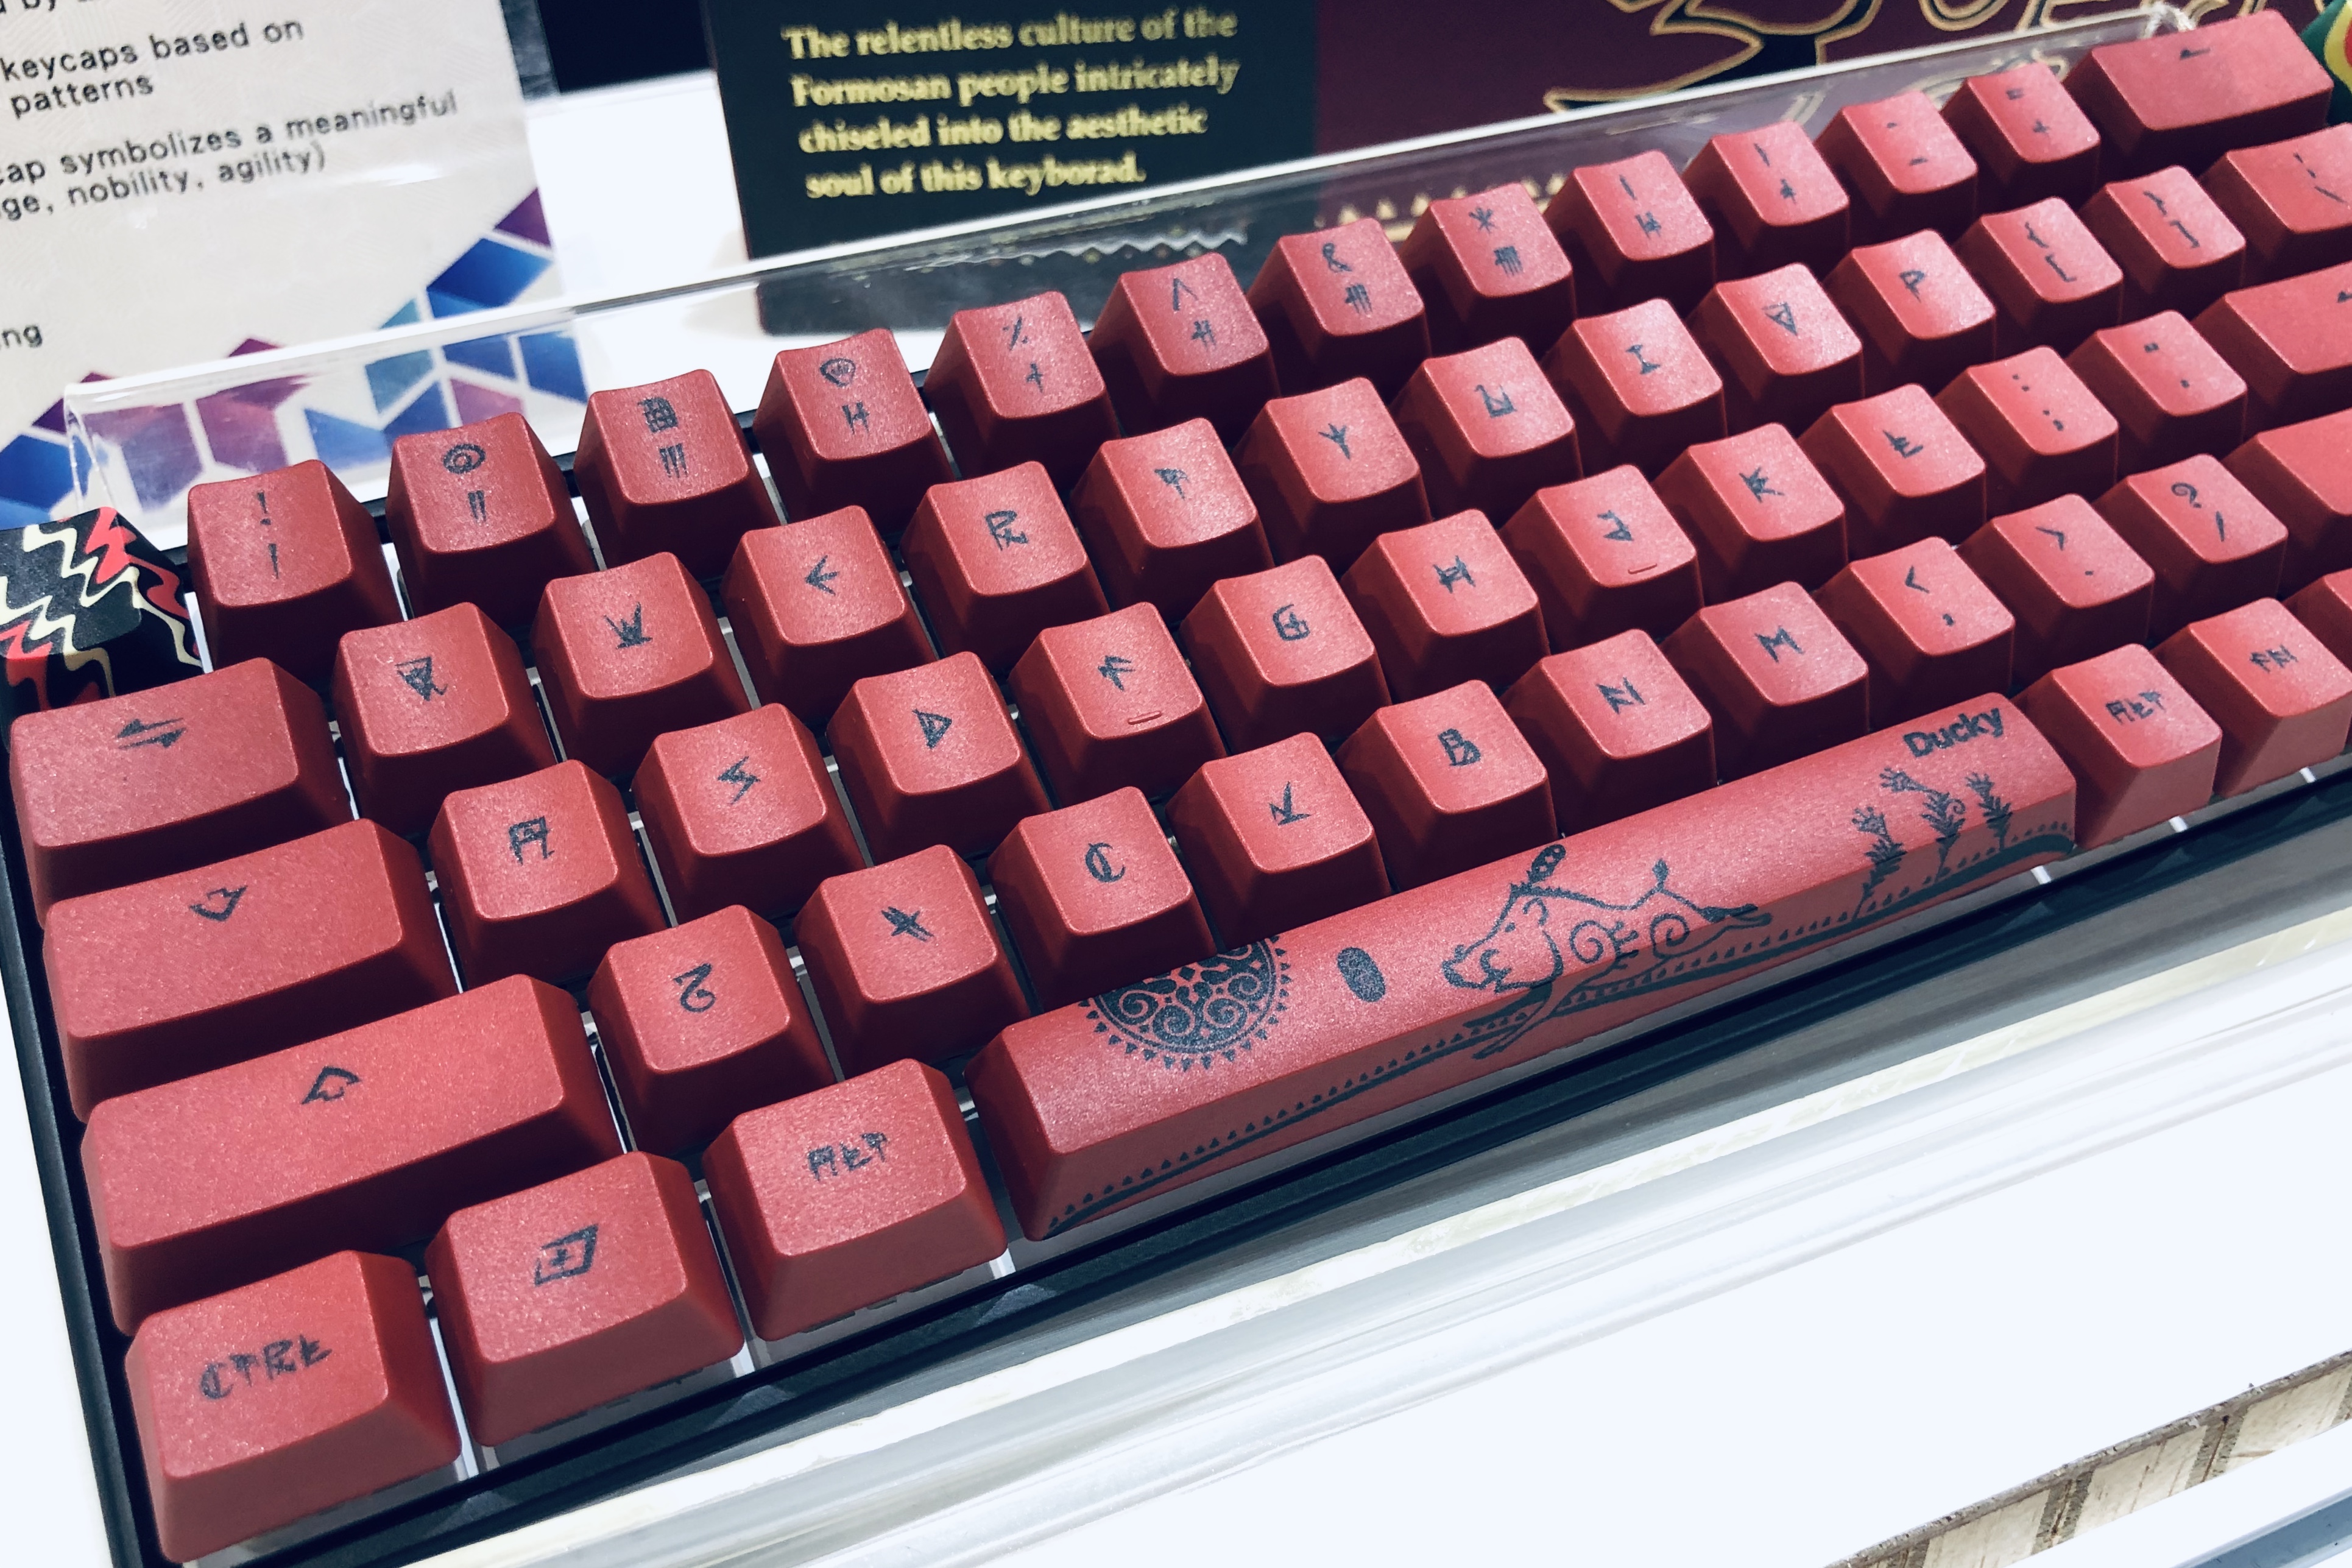 Ducky's new limited-edition mechanical keyboard pays tribute to 